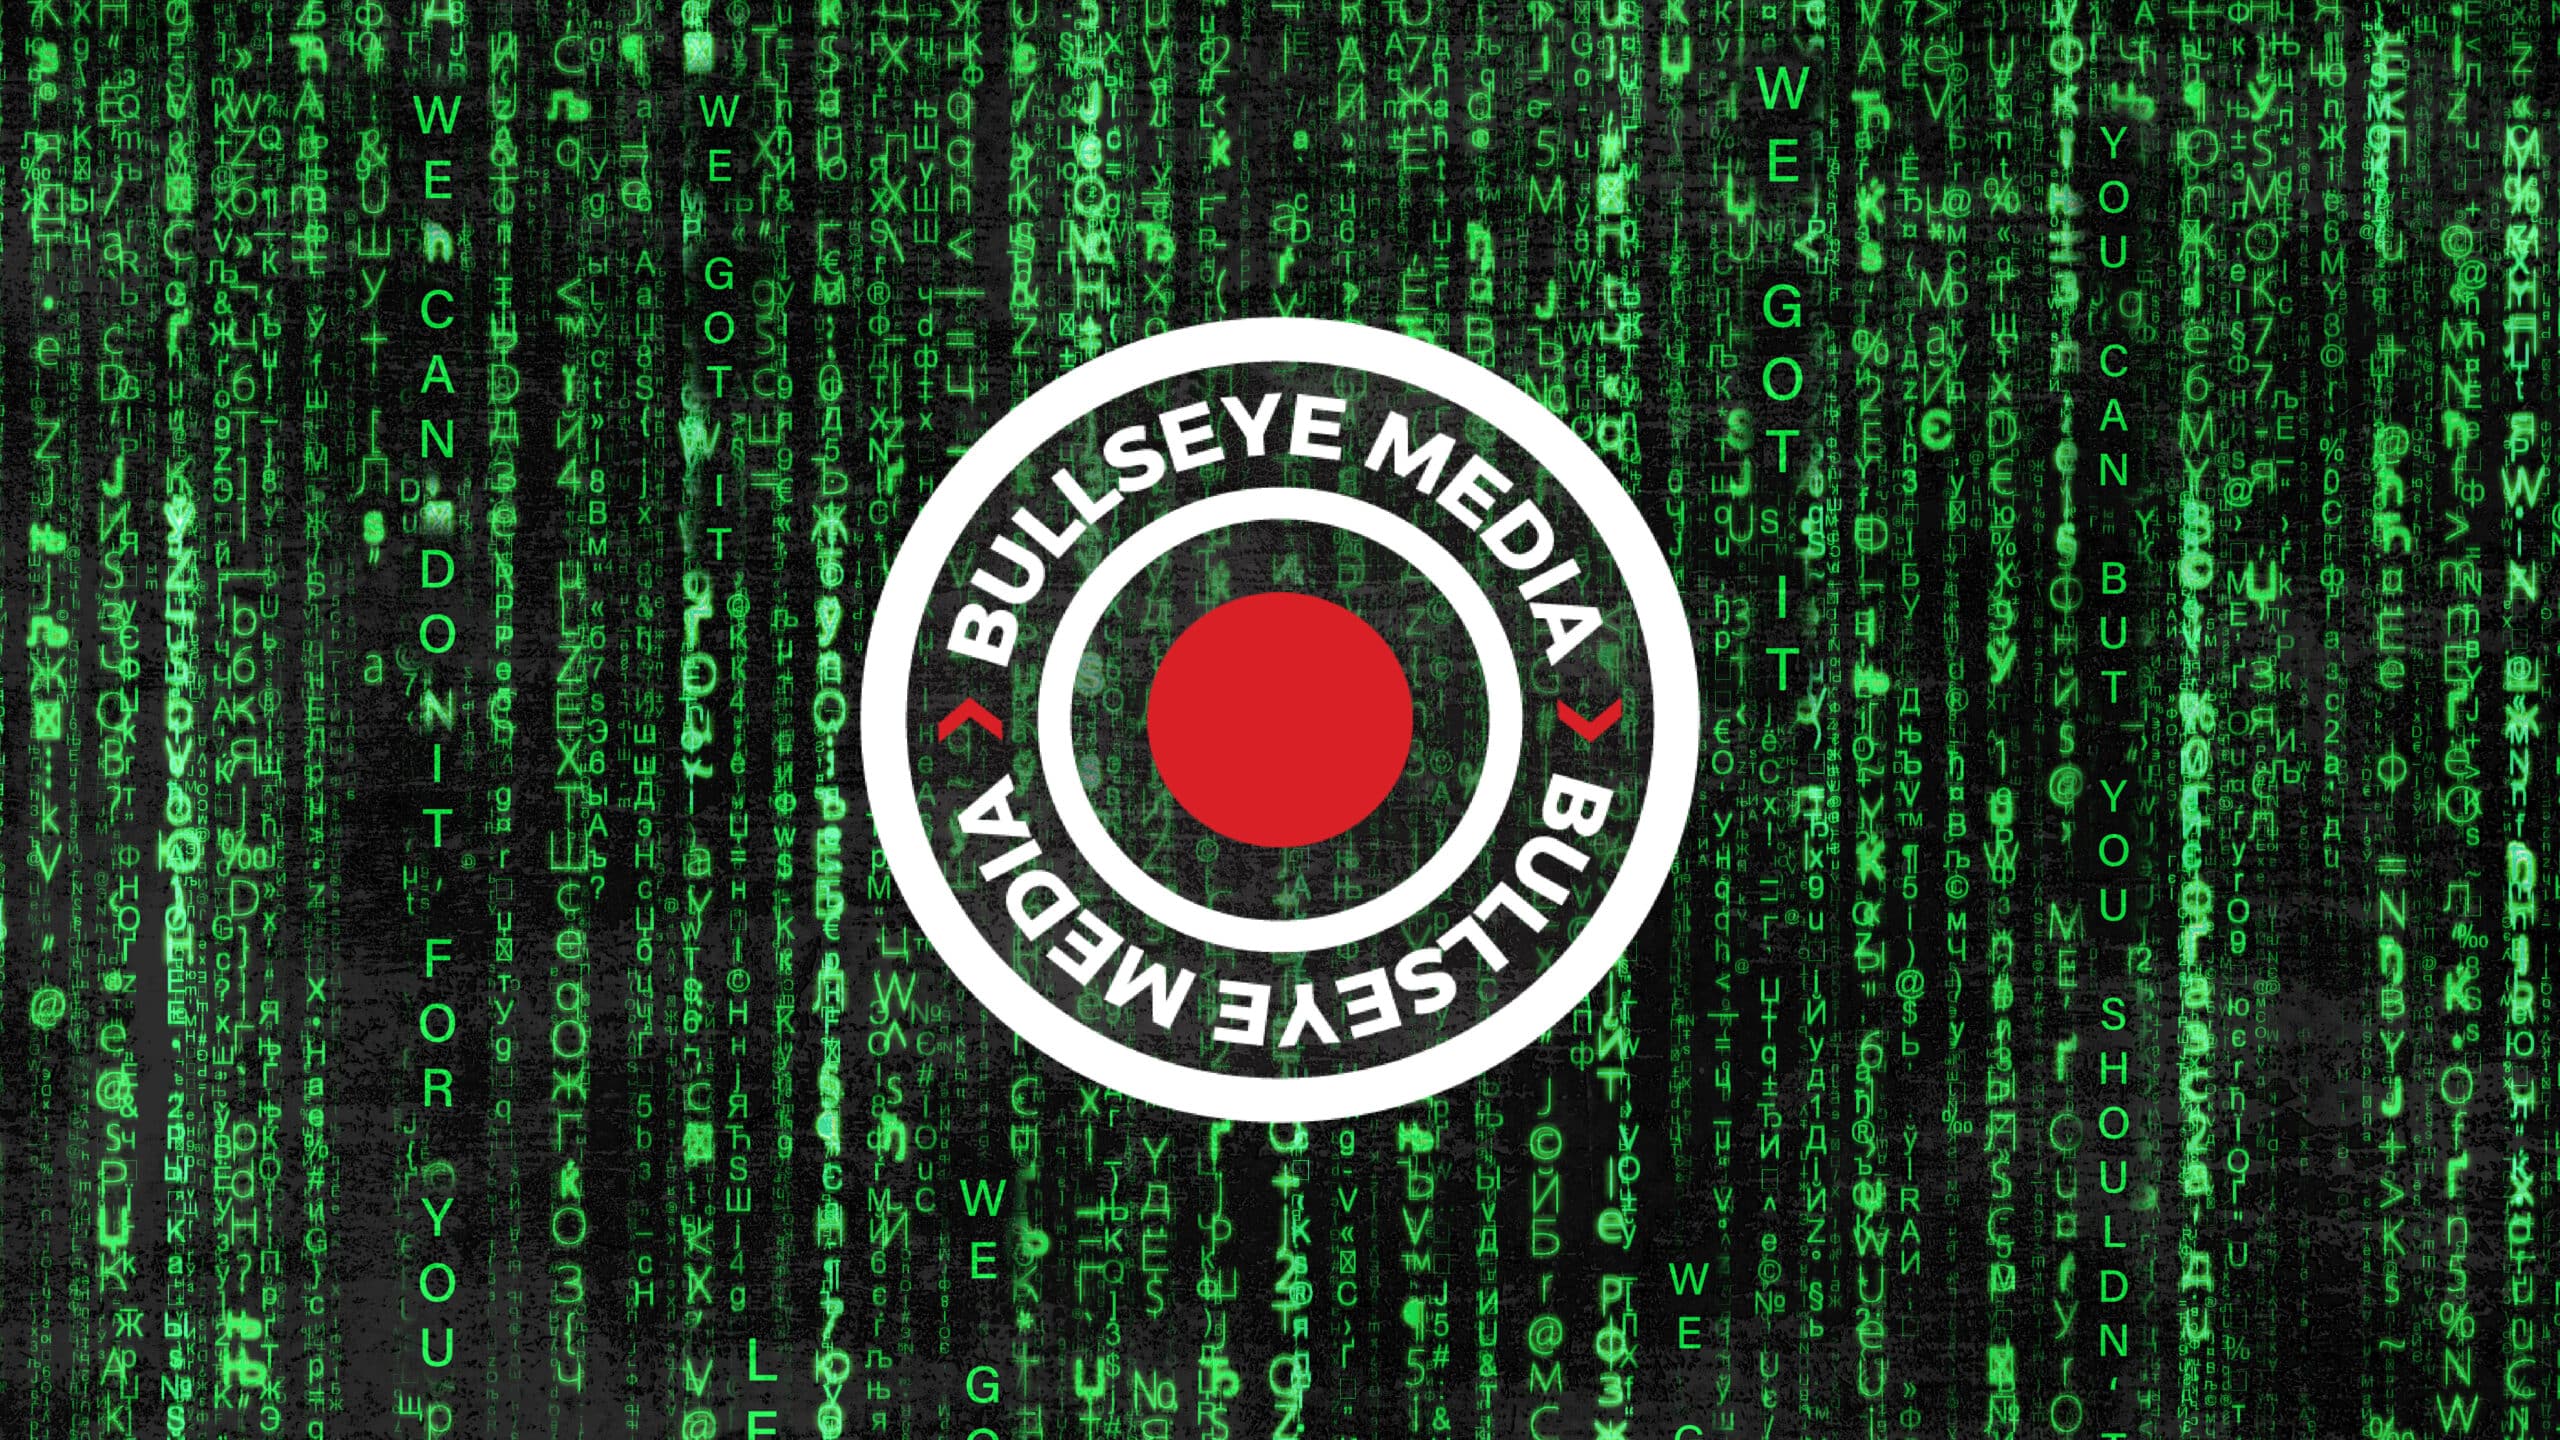 A green matrix with a Bullseye Media logo in the middle represents the convenience of letting Bullseye Media build your website for you.